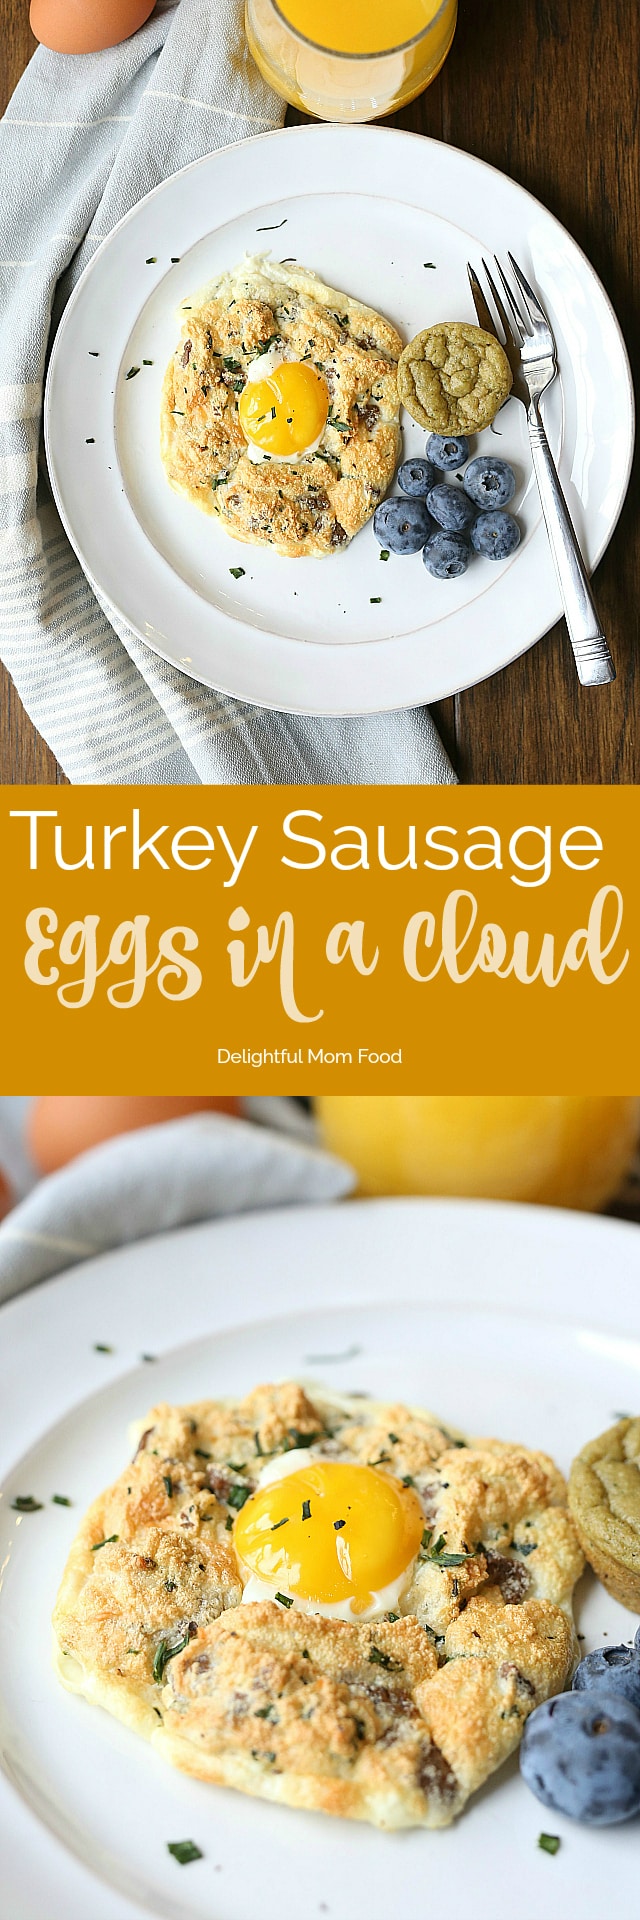 Soft and fluffy cloud eggs tossed with turkey sausage, chives and Parmesan cheese. The perfect delicate and simple breakfast or brunch to revamp a typical egg dish!